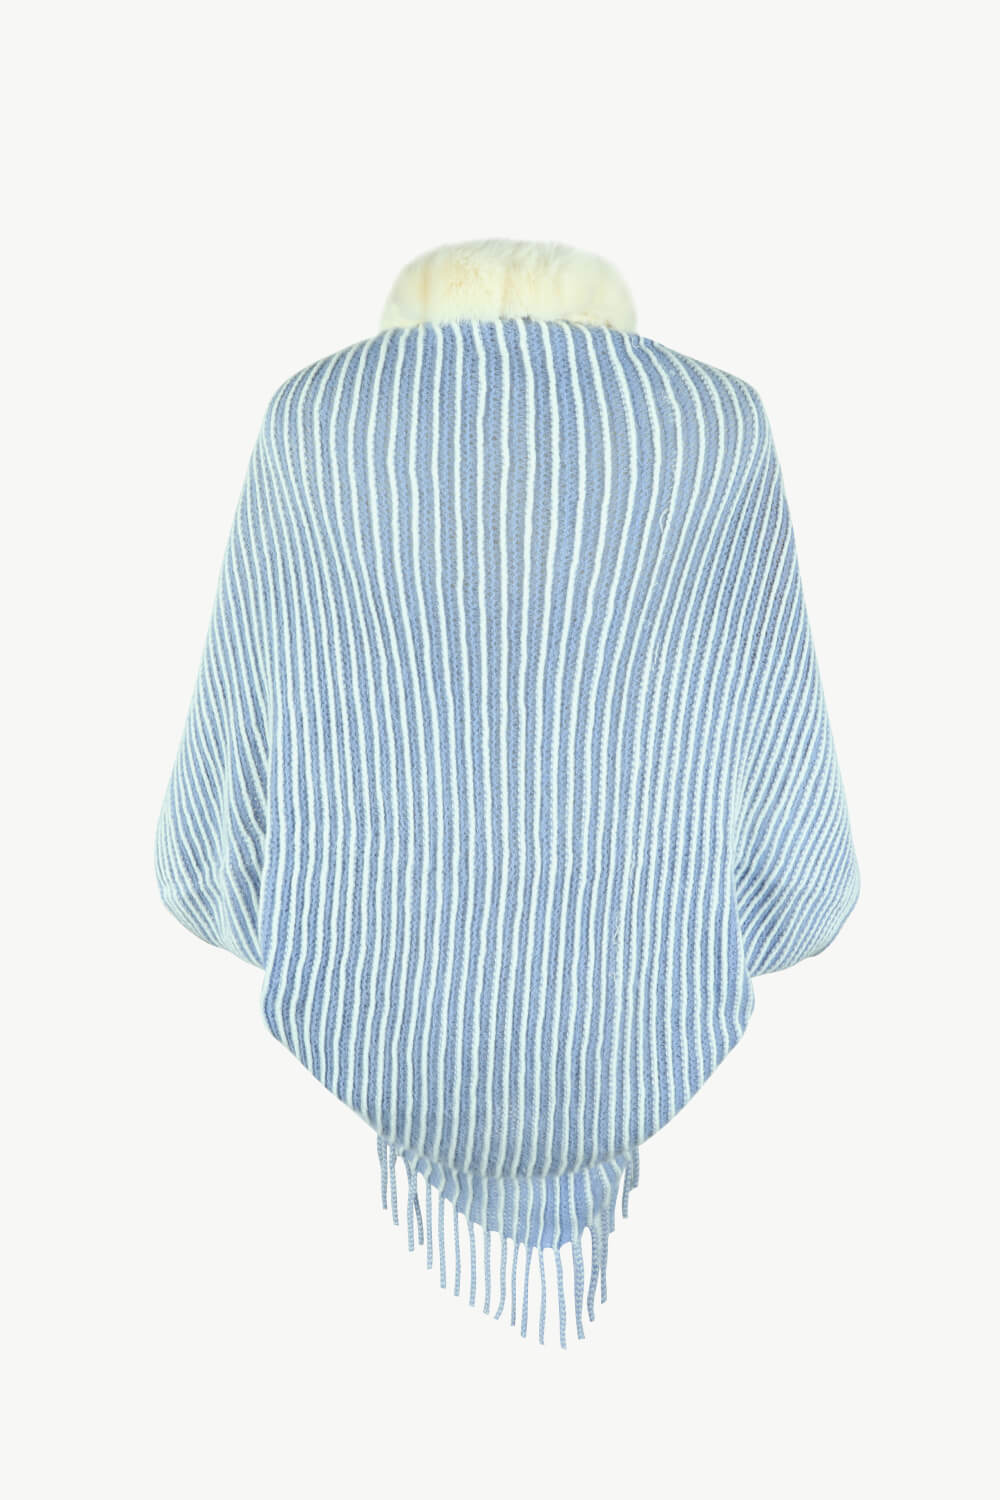 Striped Open Front Fringe Poncho - Thandynie